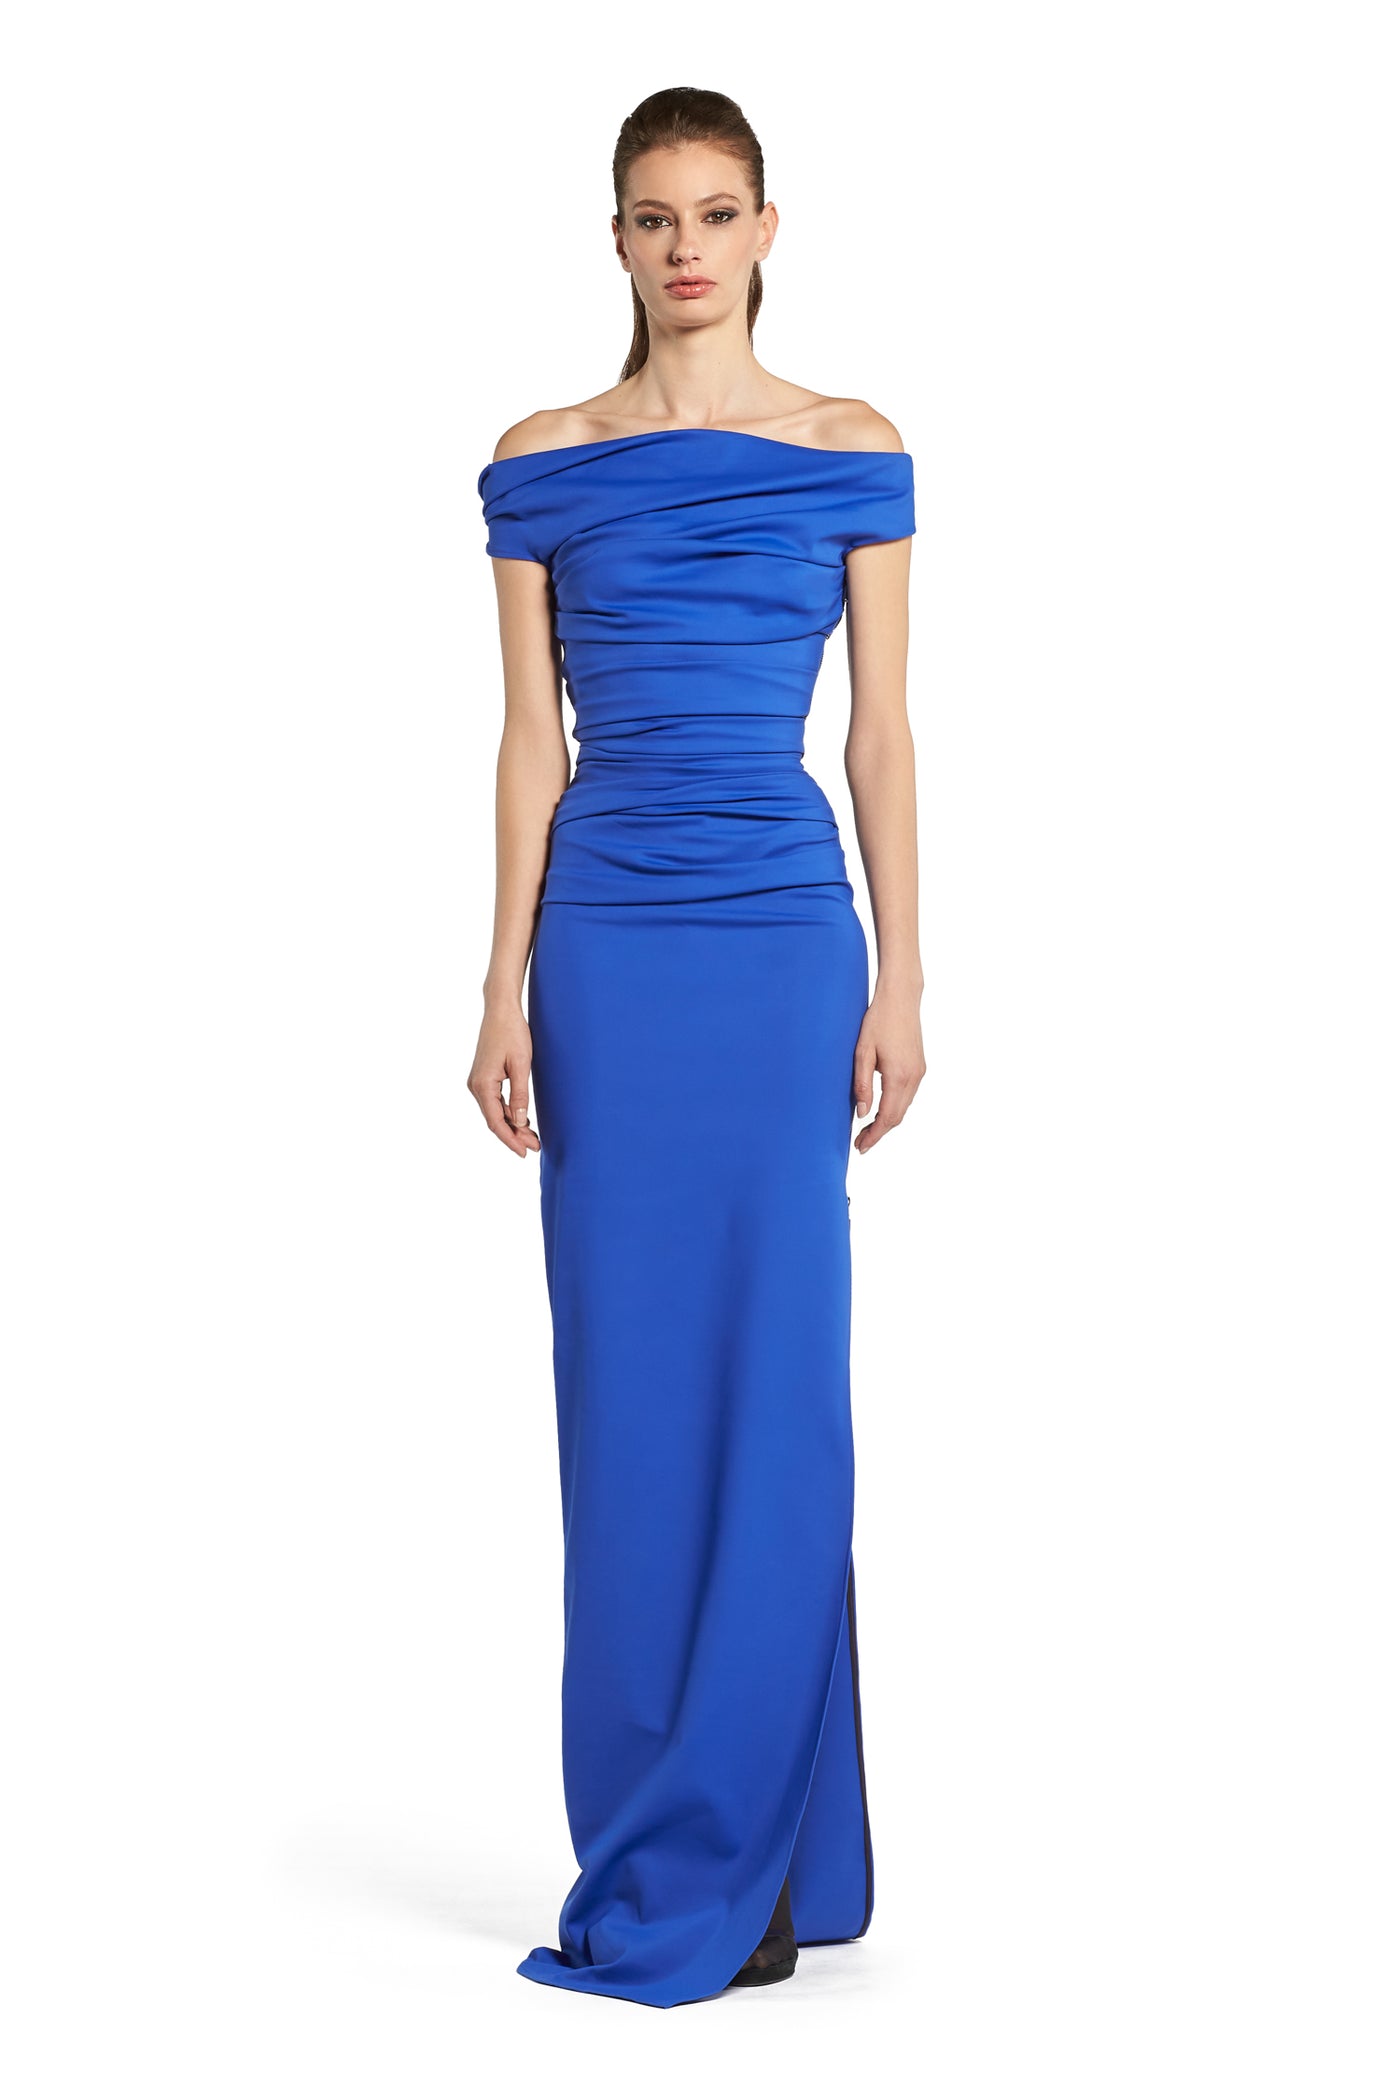 Assertion Gown - Electric